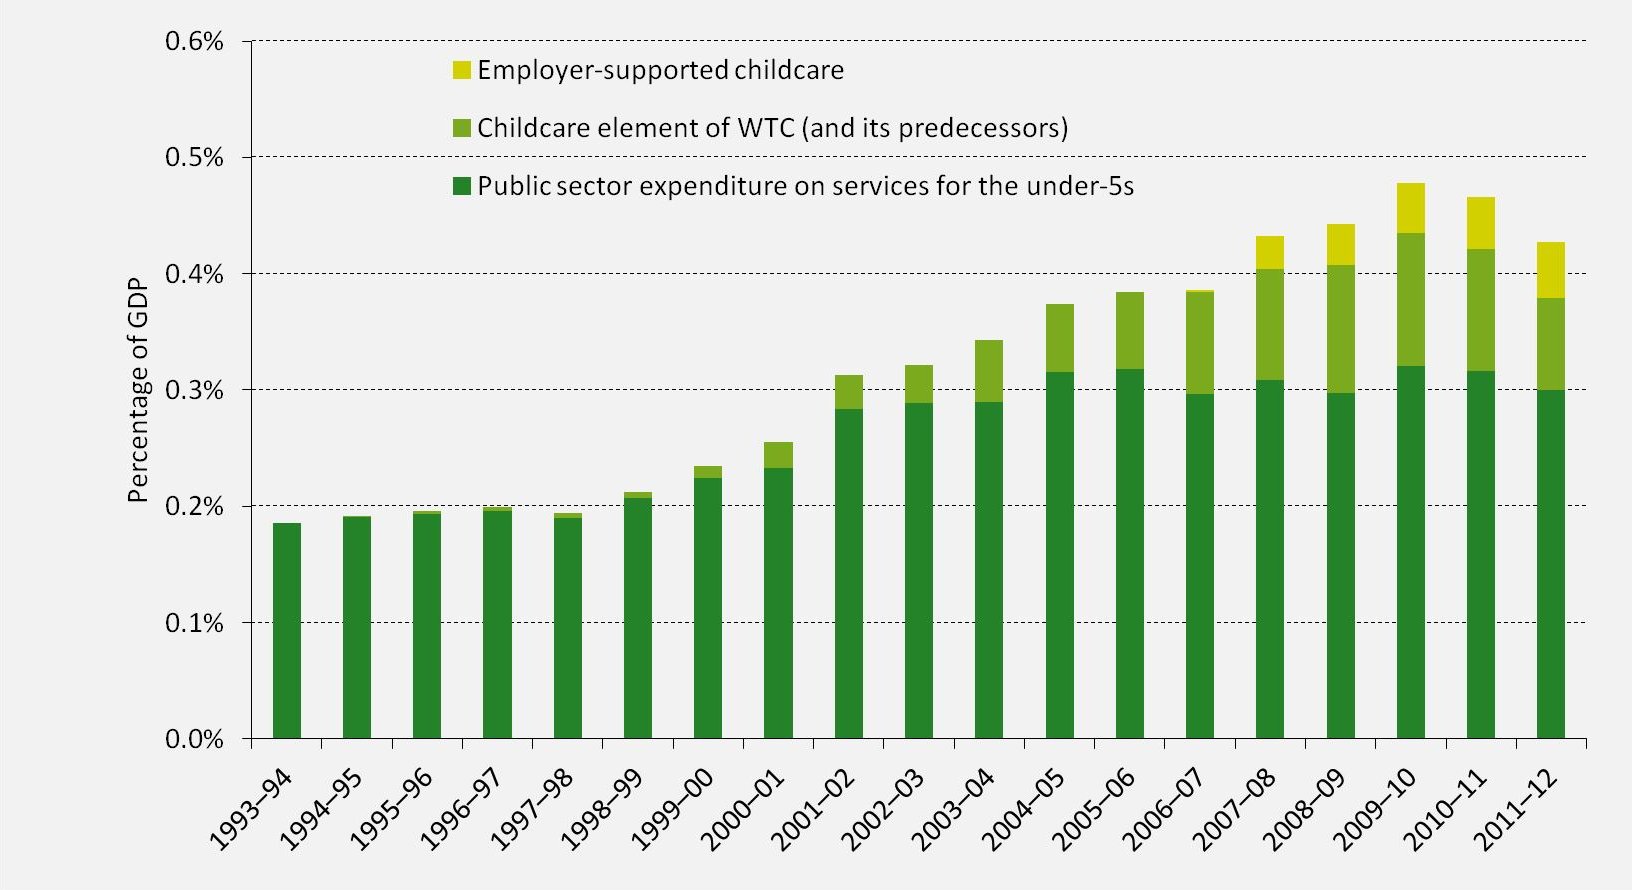 Spending on the main sources of childcare support in the UK over time